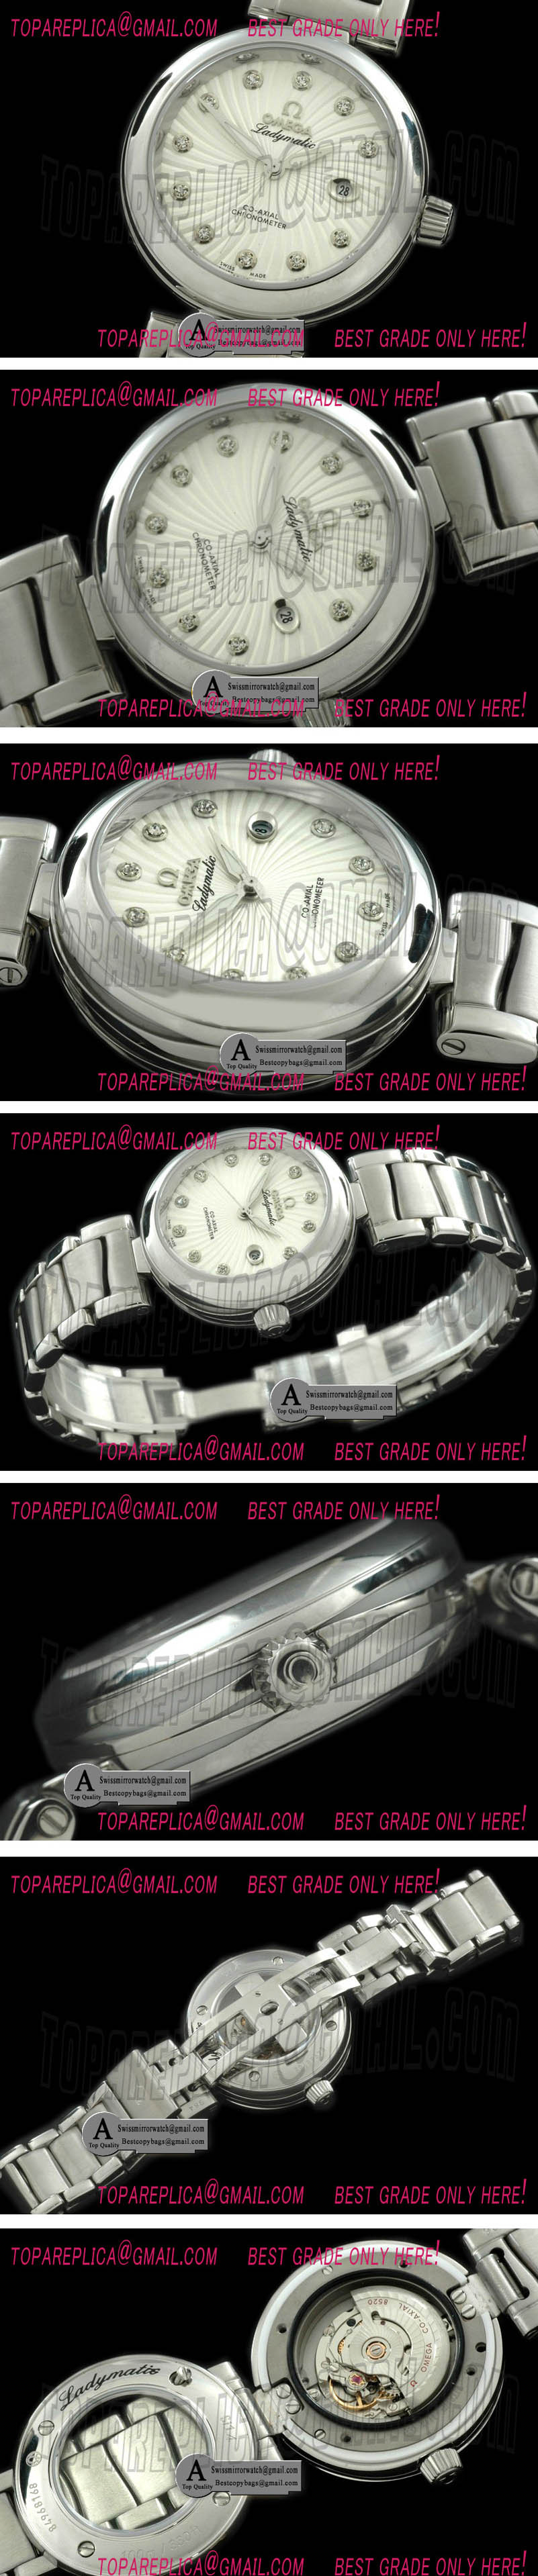 Omega 425.30.34.20.55.001 Deville Ladymatic SS/SS White S-2671 Replica Watches